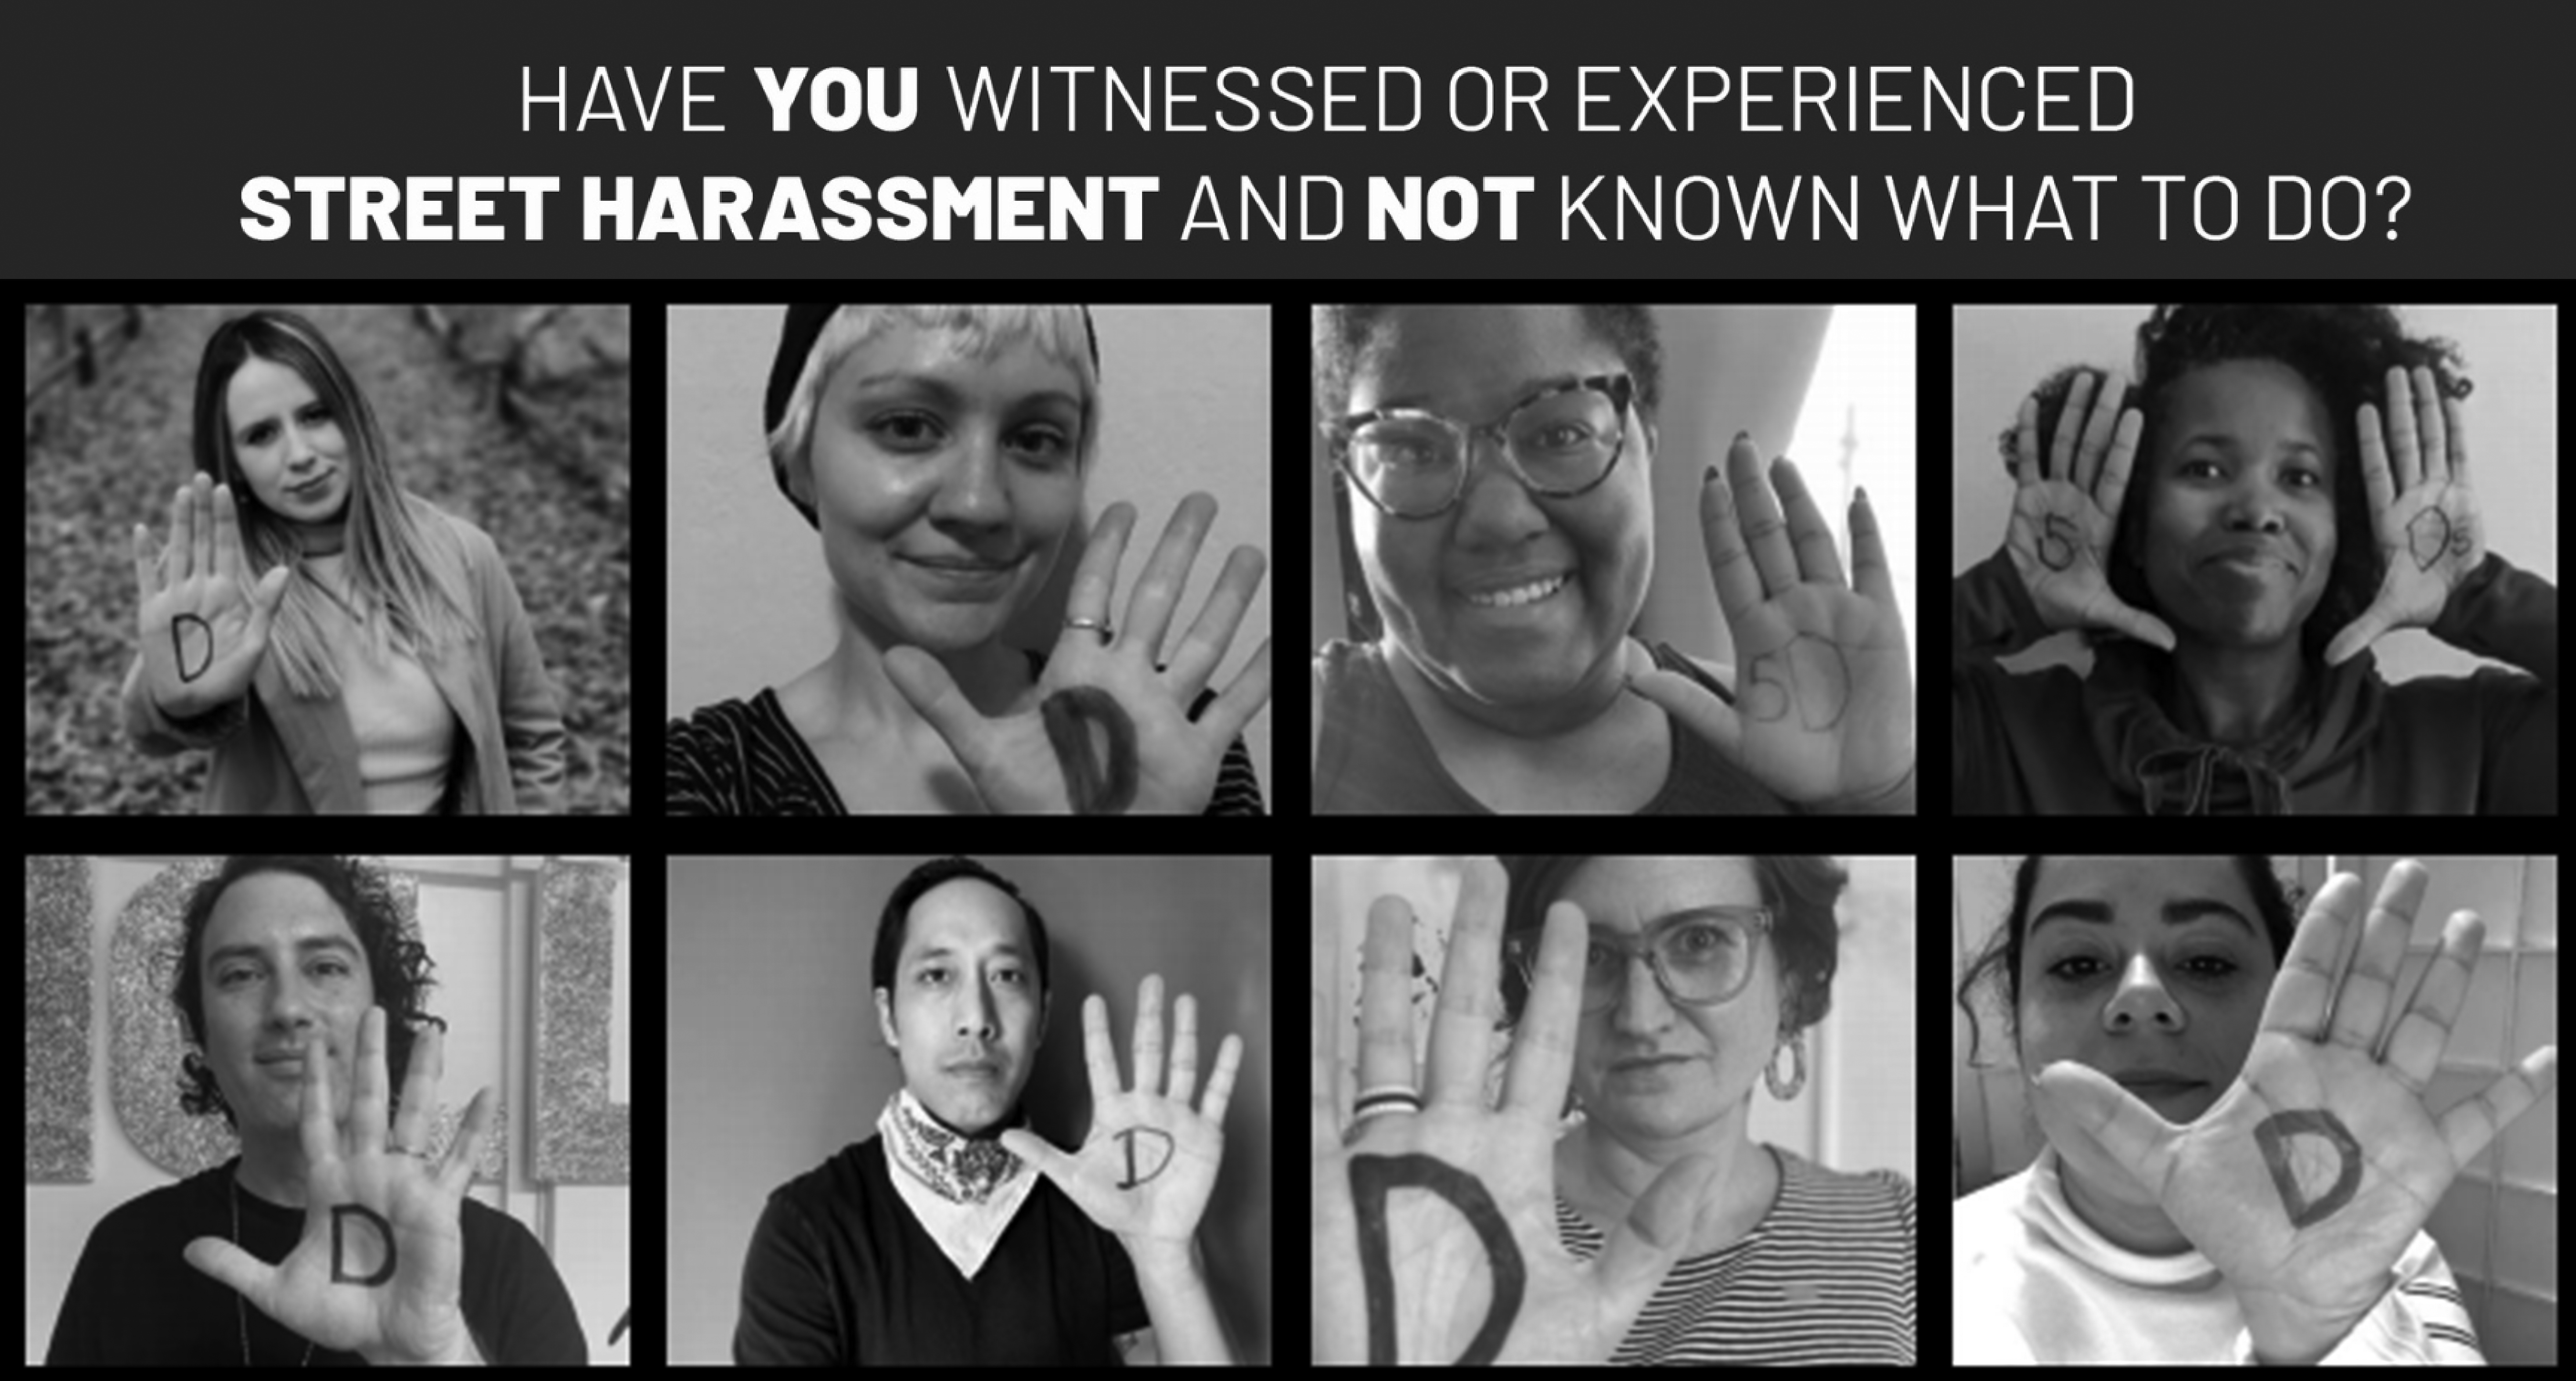 Street Harassment Workshop and Training info